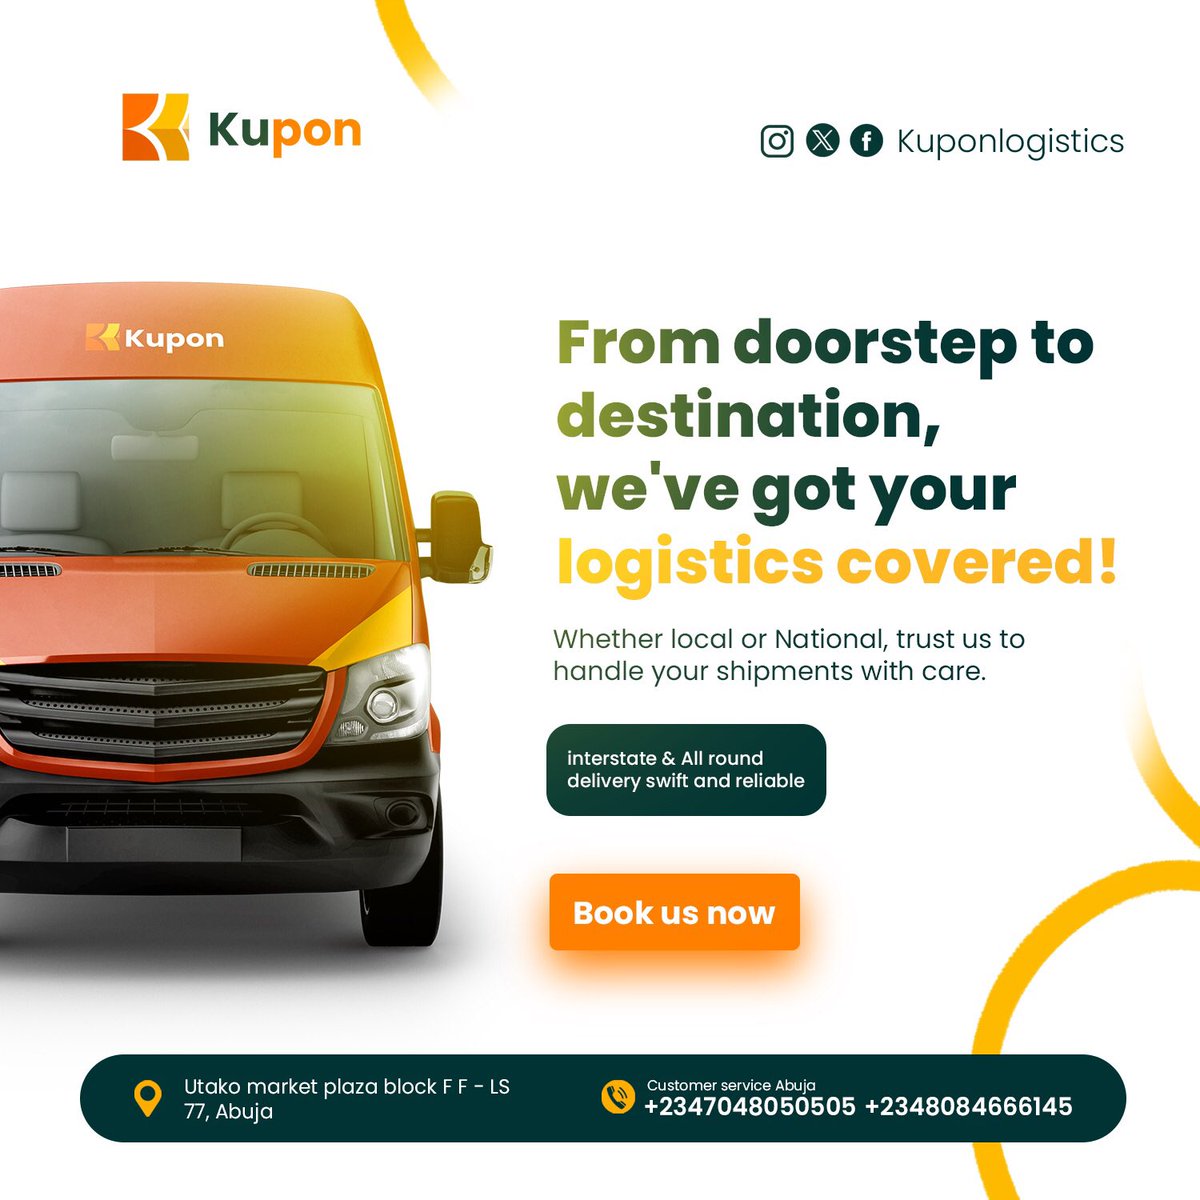 Ship smarter and conveniently with the kupon app by KUPON LOGISTICS 

Enjoy seamless pickup, delivery, and discount on domestic shipping fees.

Download the kupon app today experience and discounted deliveries today 

#kuponlogistics
#hyperlocaldeliveryapps
#wedeliver